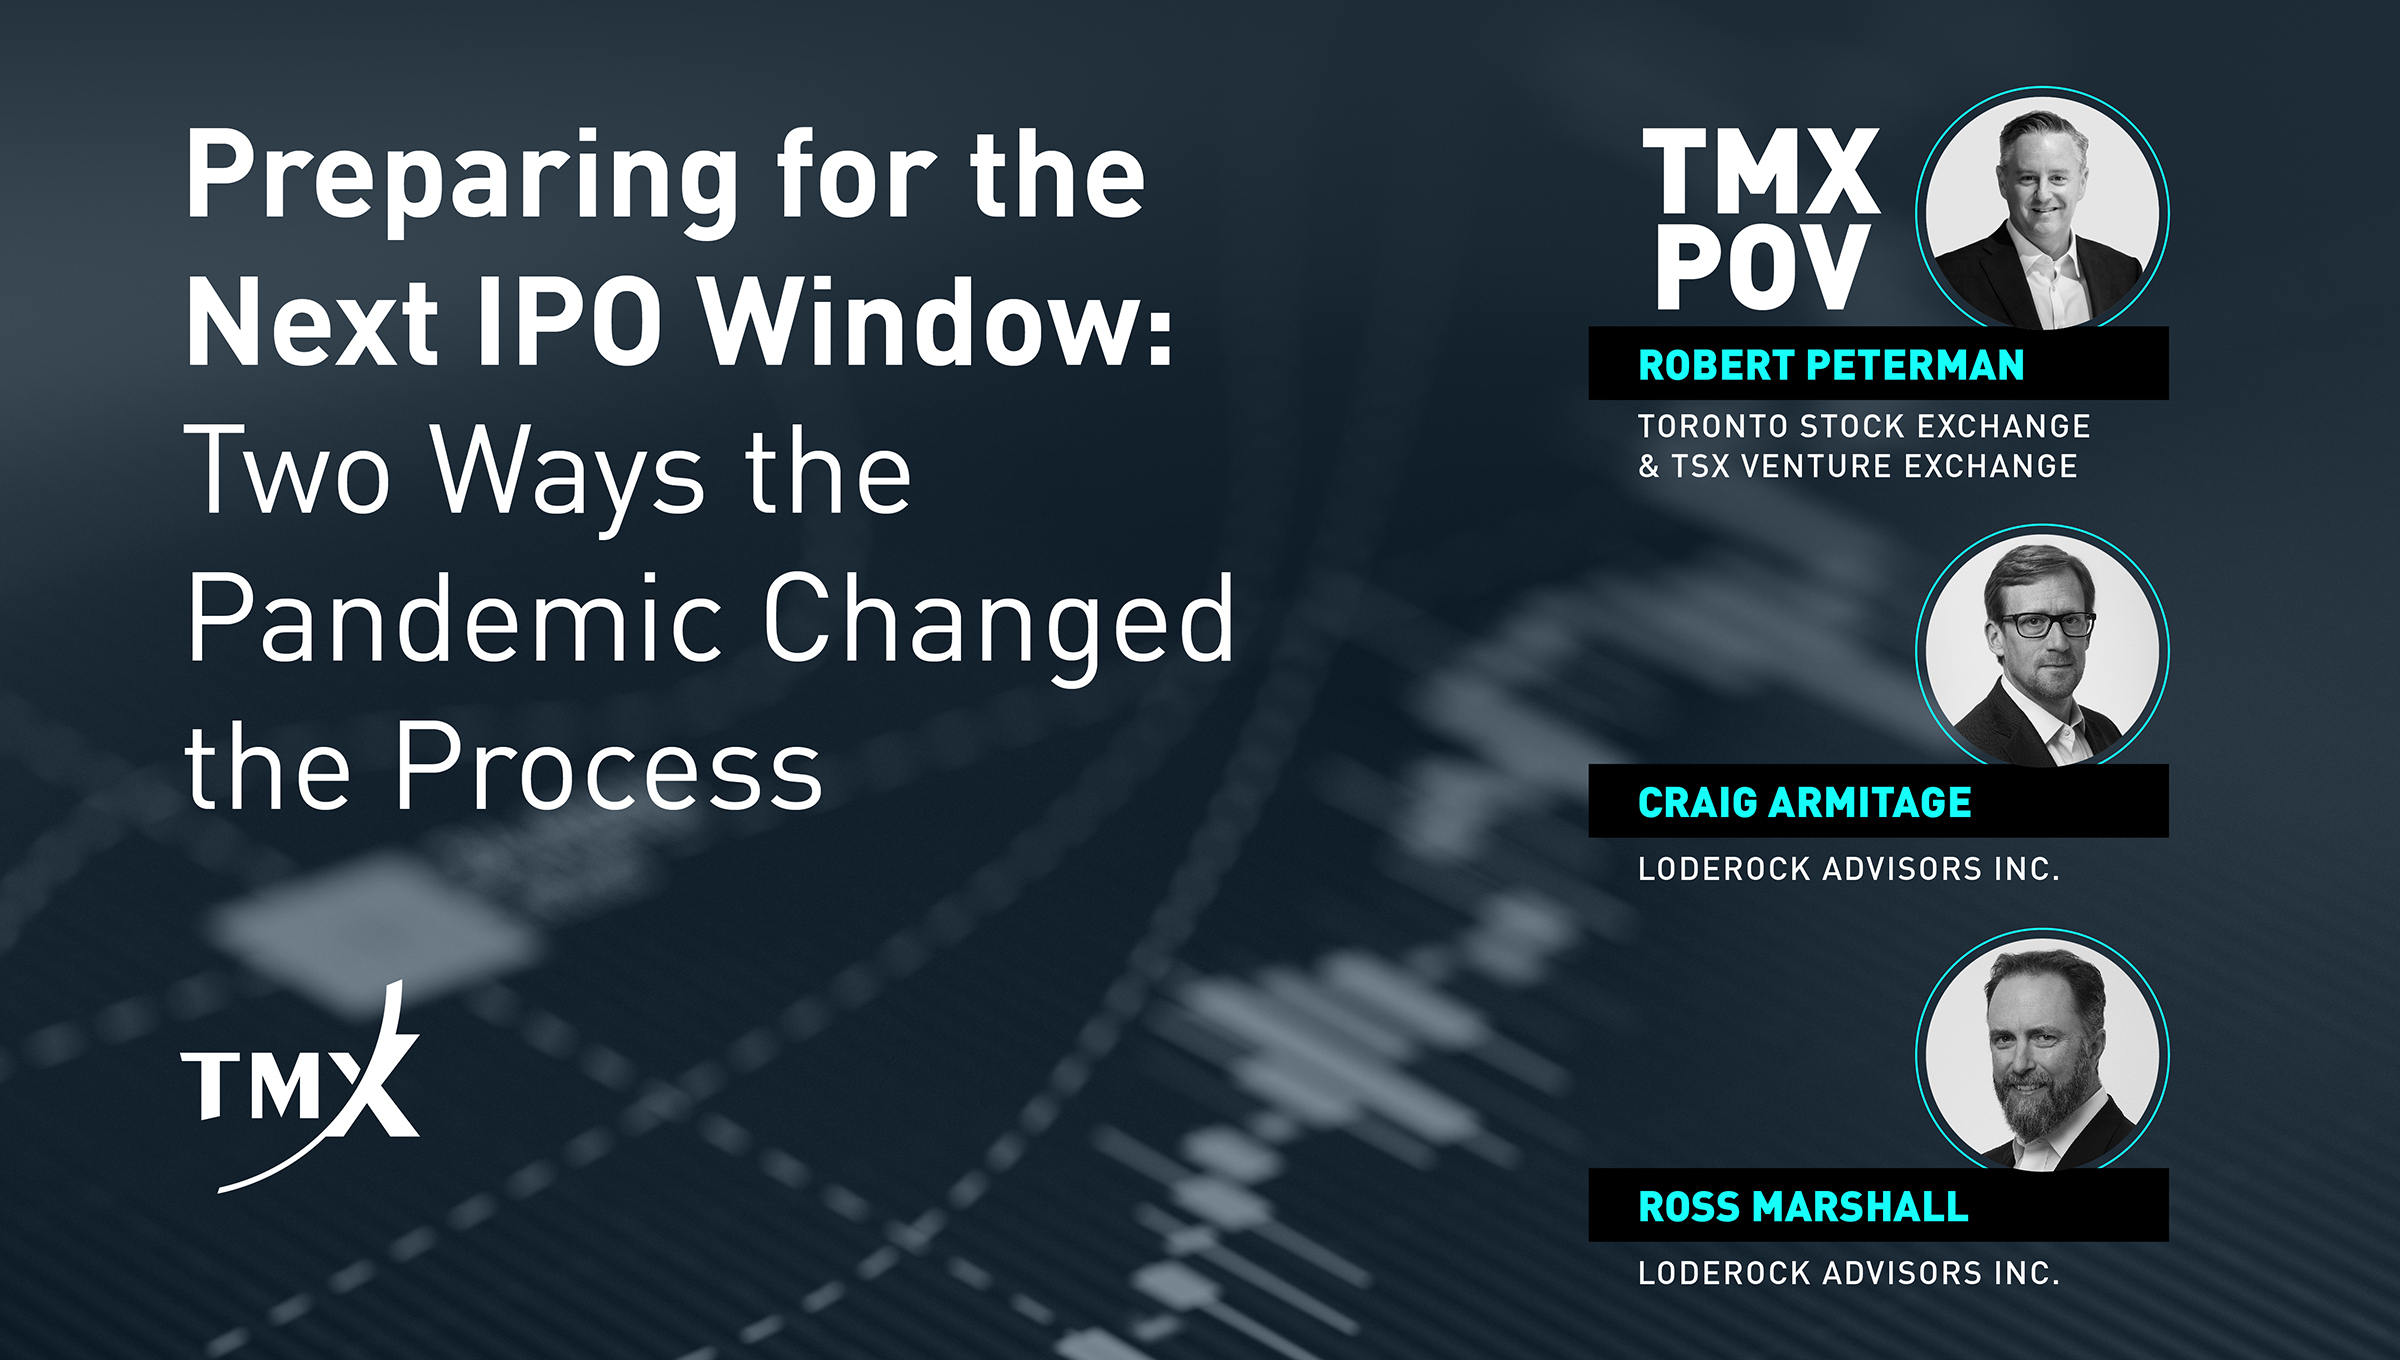 TMX POV - Preparing for the Next IPO Window: Two Ways the Pandemic Changed the Process